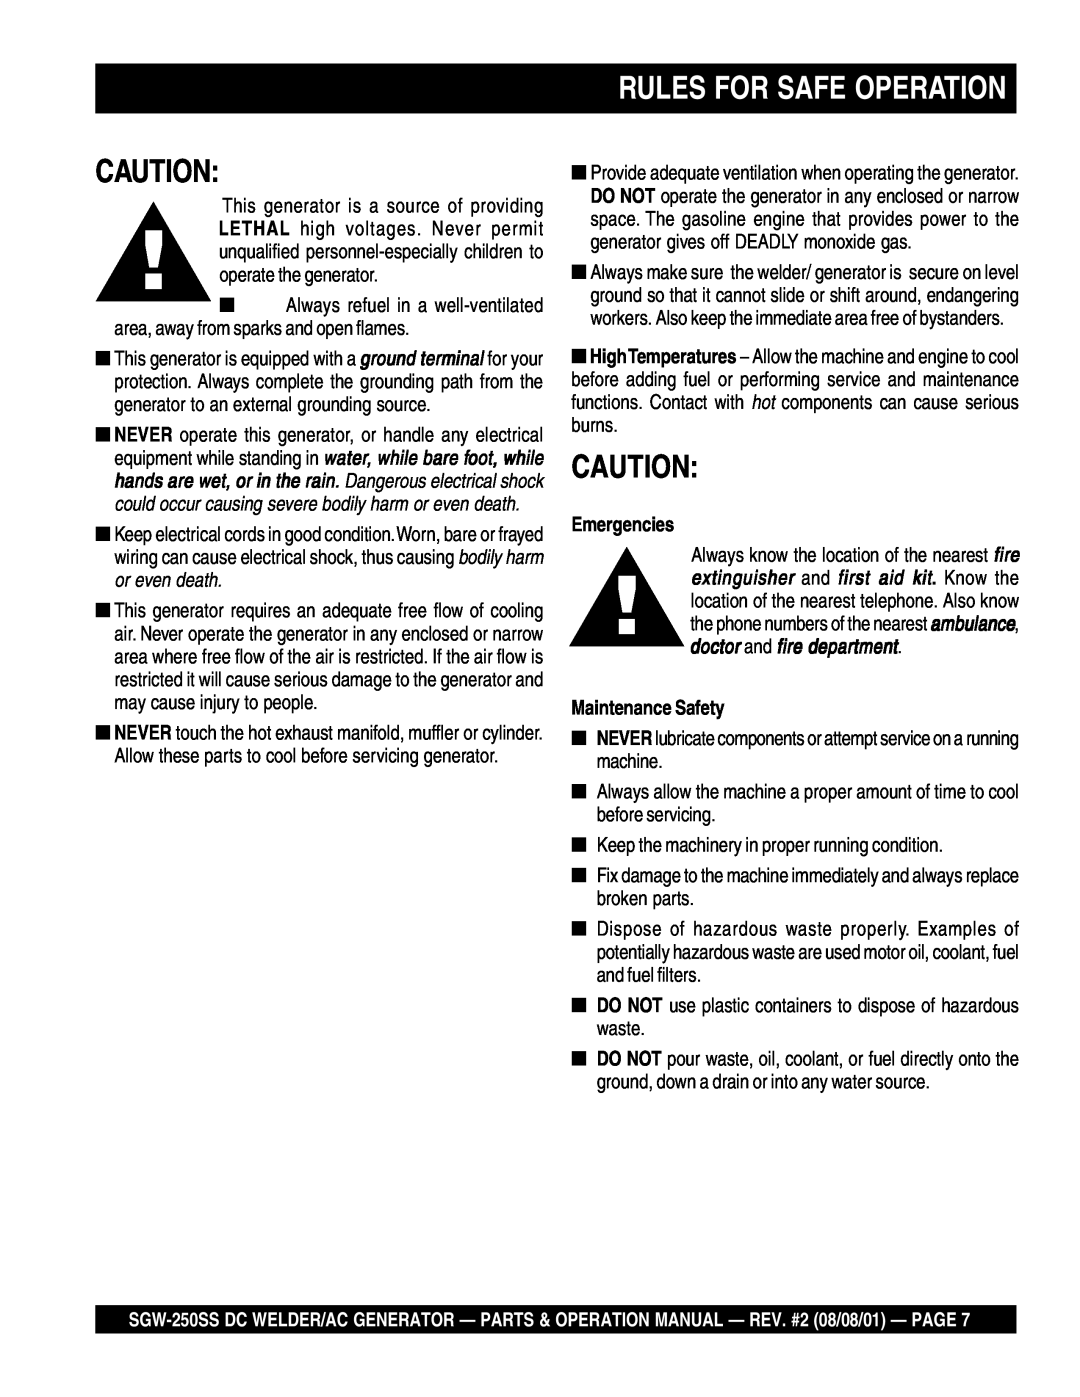 Multiquip SGW-250SS operation manual Rules For Safe Operation, Emergencies, Maintenance Safety 